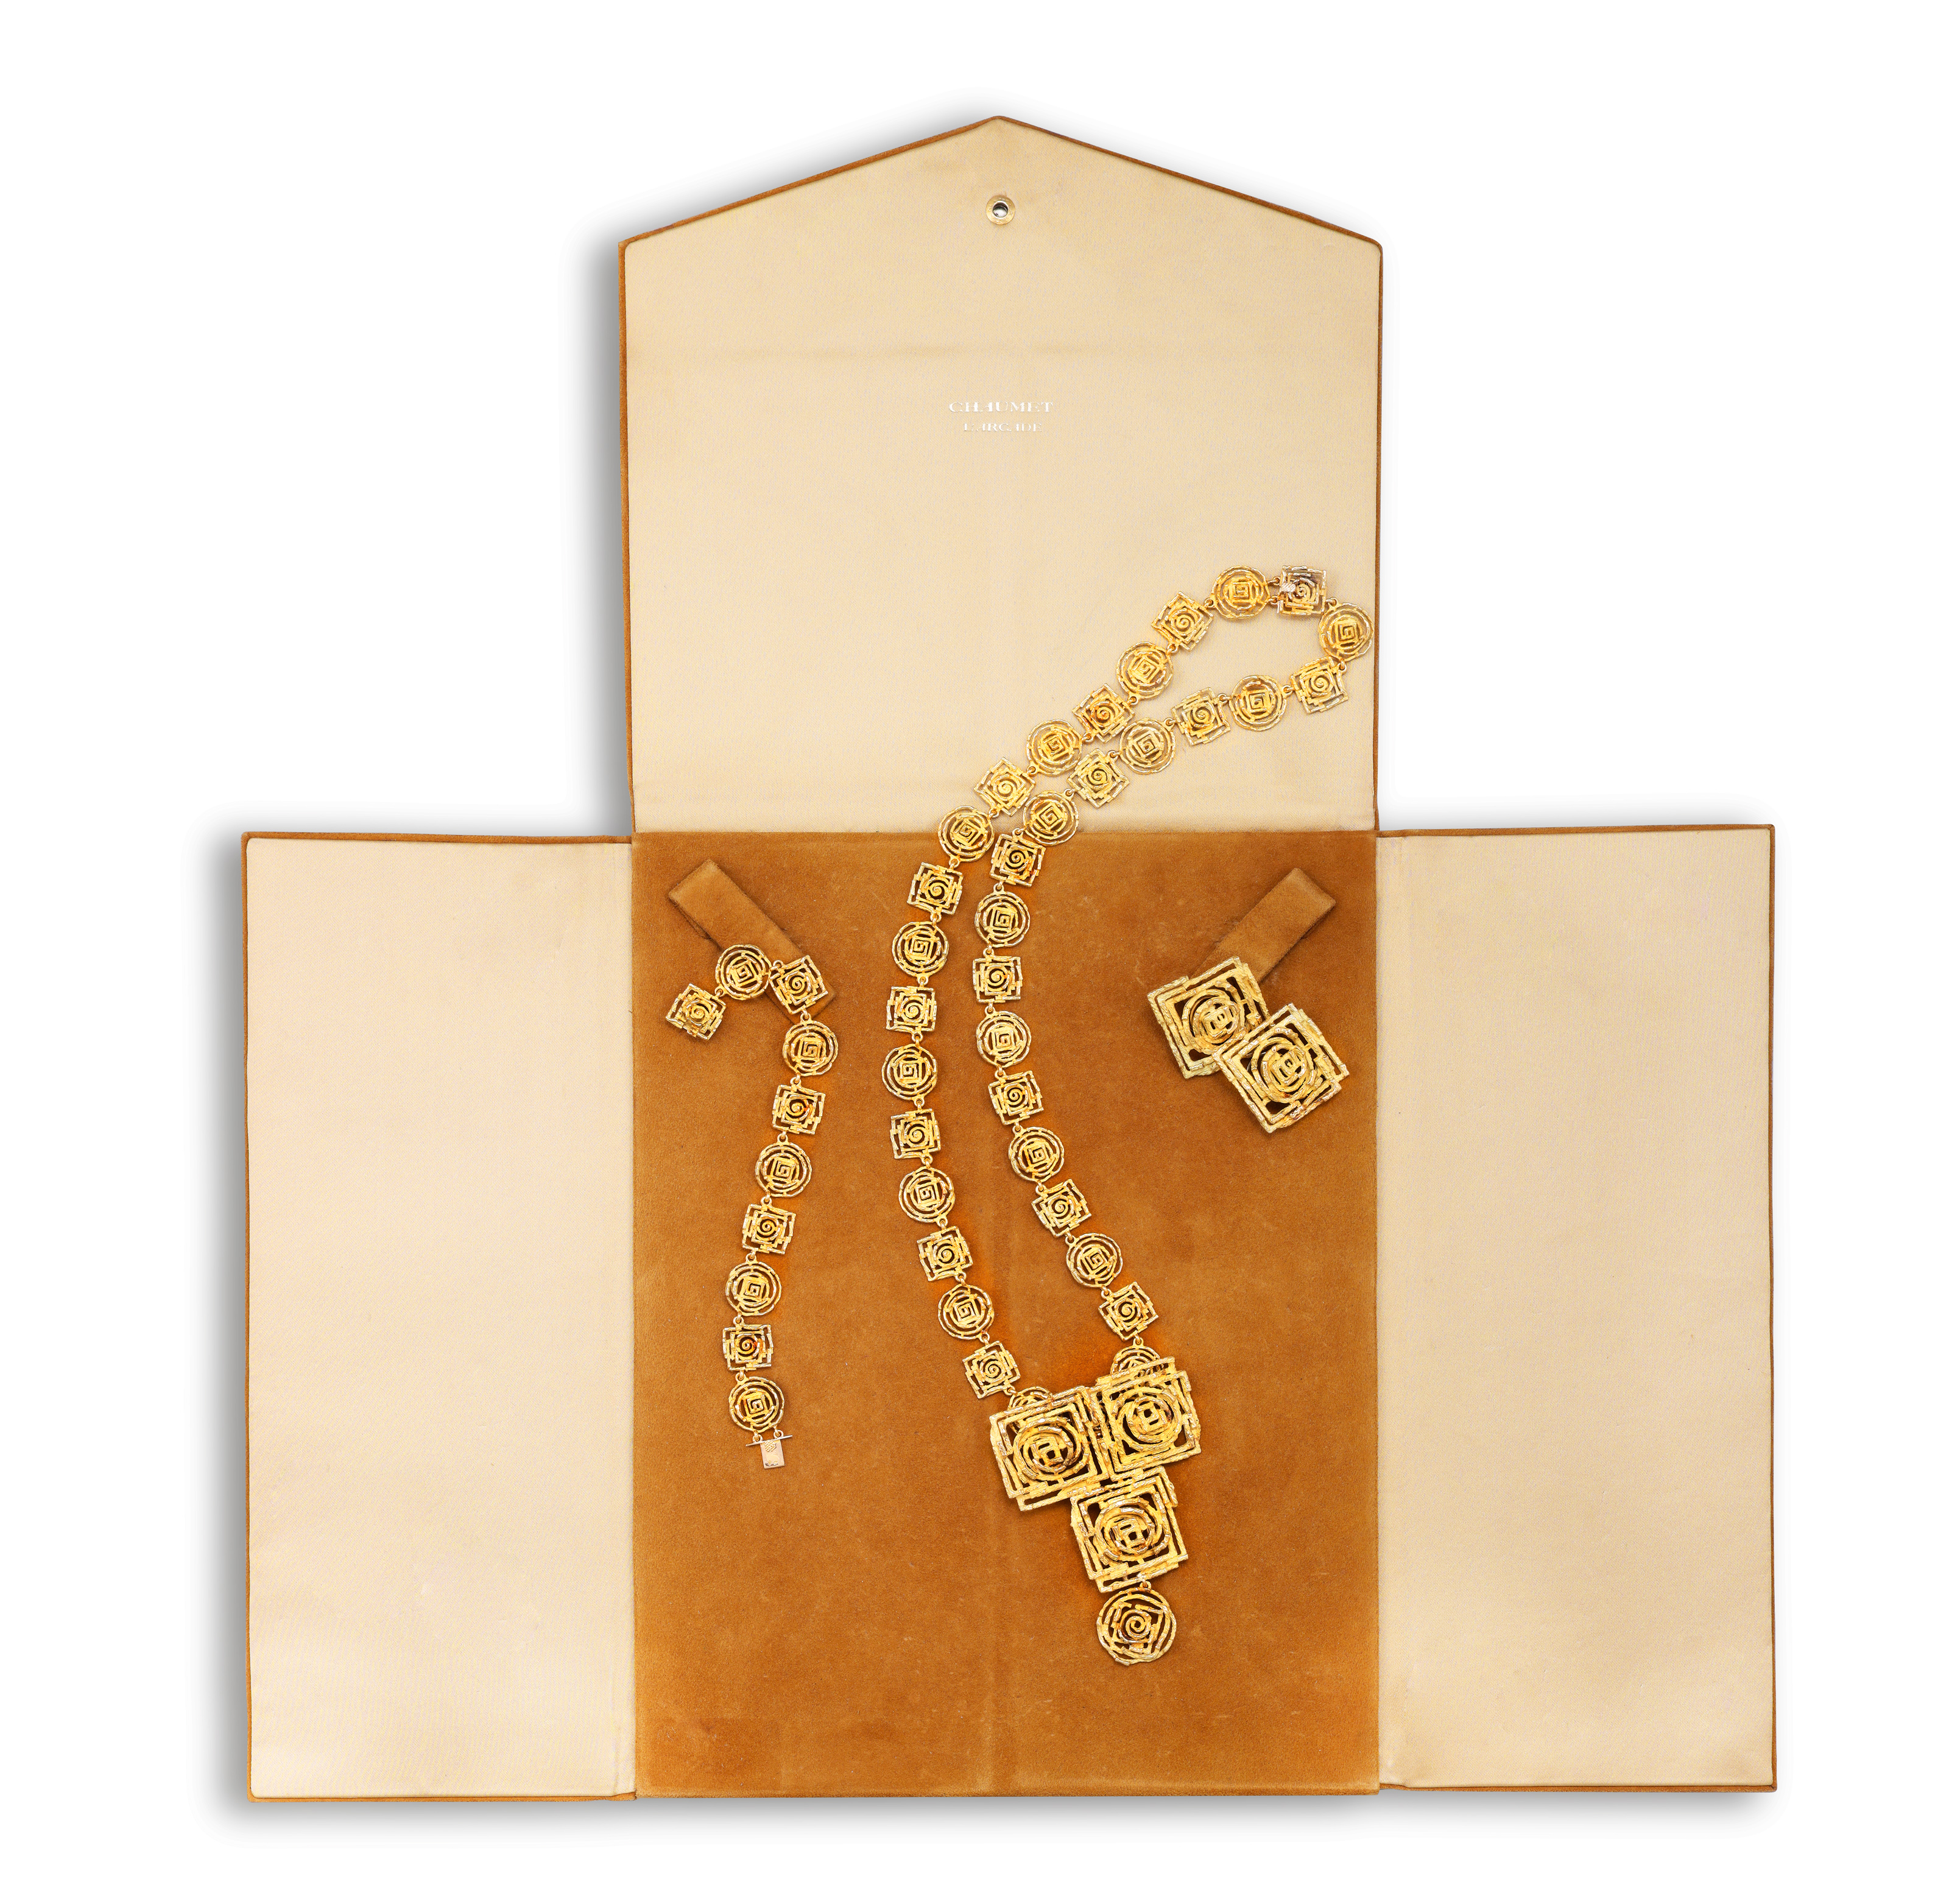 AN 18K GOLD NECKLACE, BRACELET, BROOCH AND EARCLIPS EN SUITE, BY CHAUMET, CIRCA 1970 Each composed